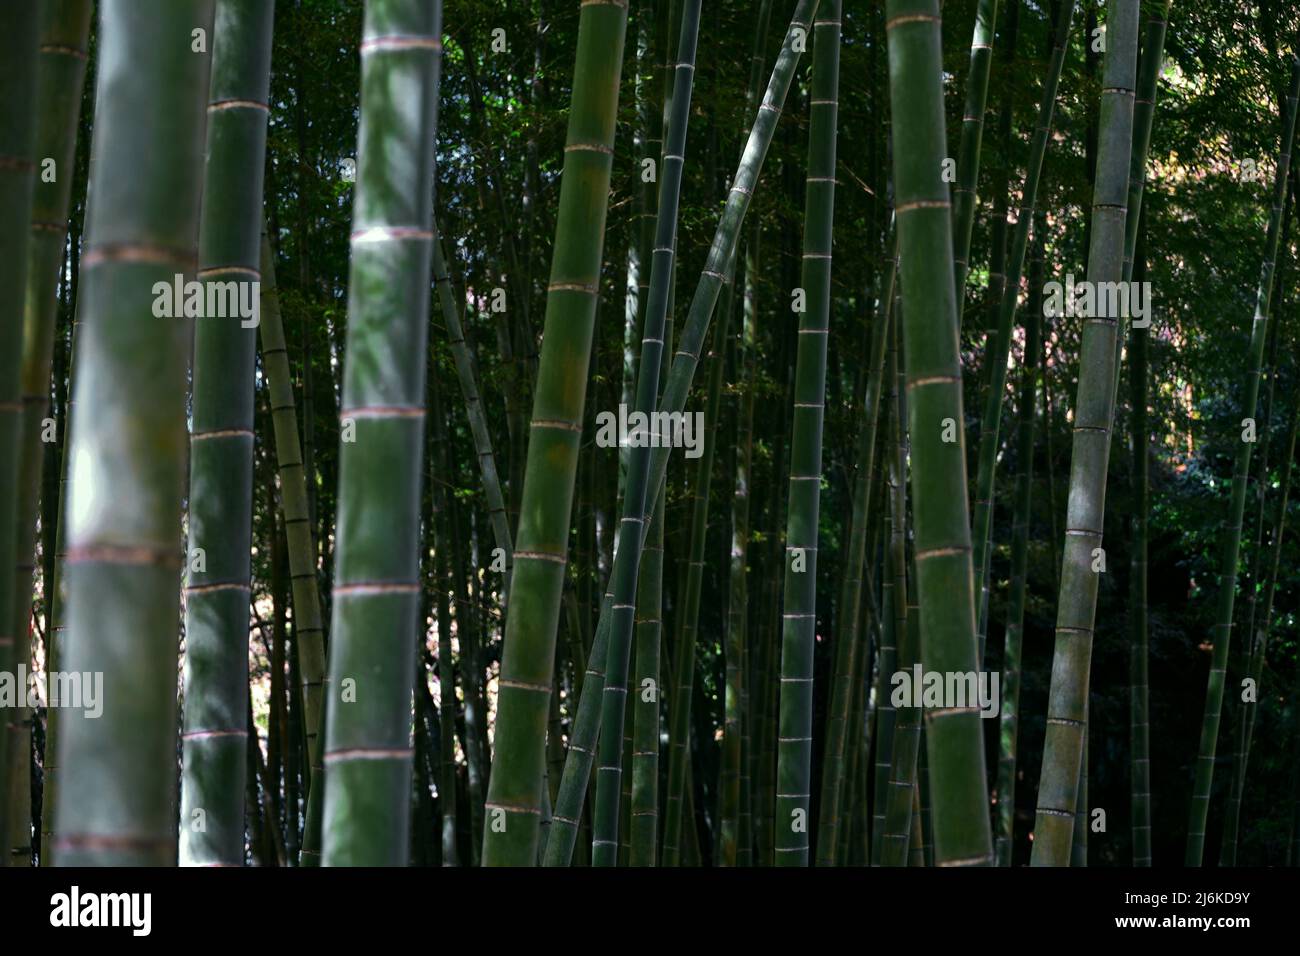 Japanese bamboo grove as a background material Stock Photo